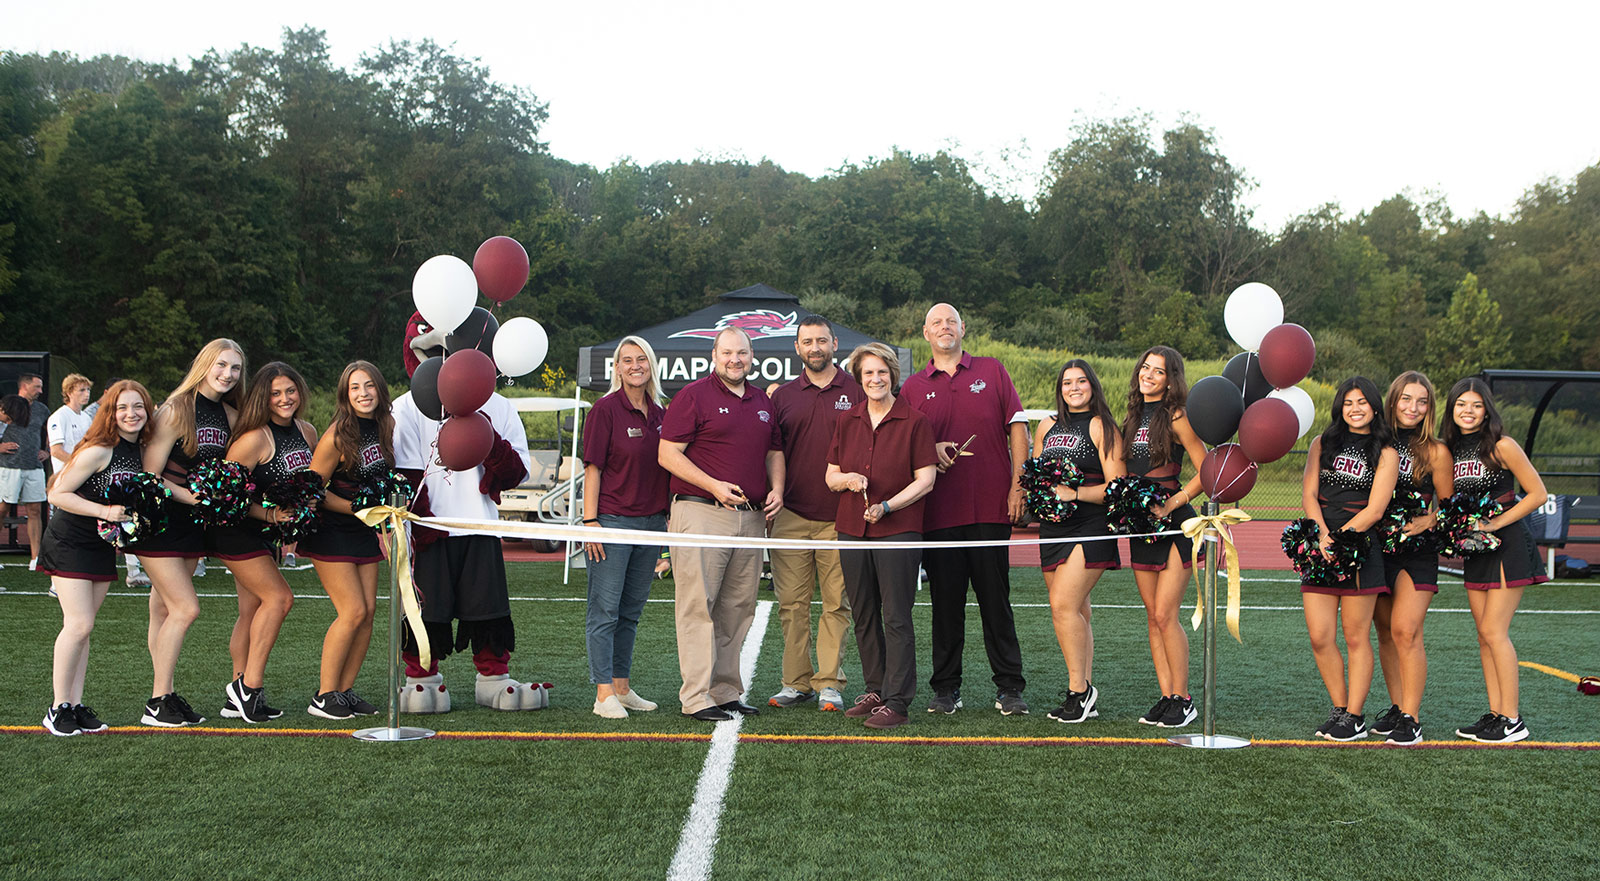 Ribbon Cutting of a new athletic field at Ramapo College